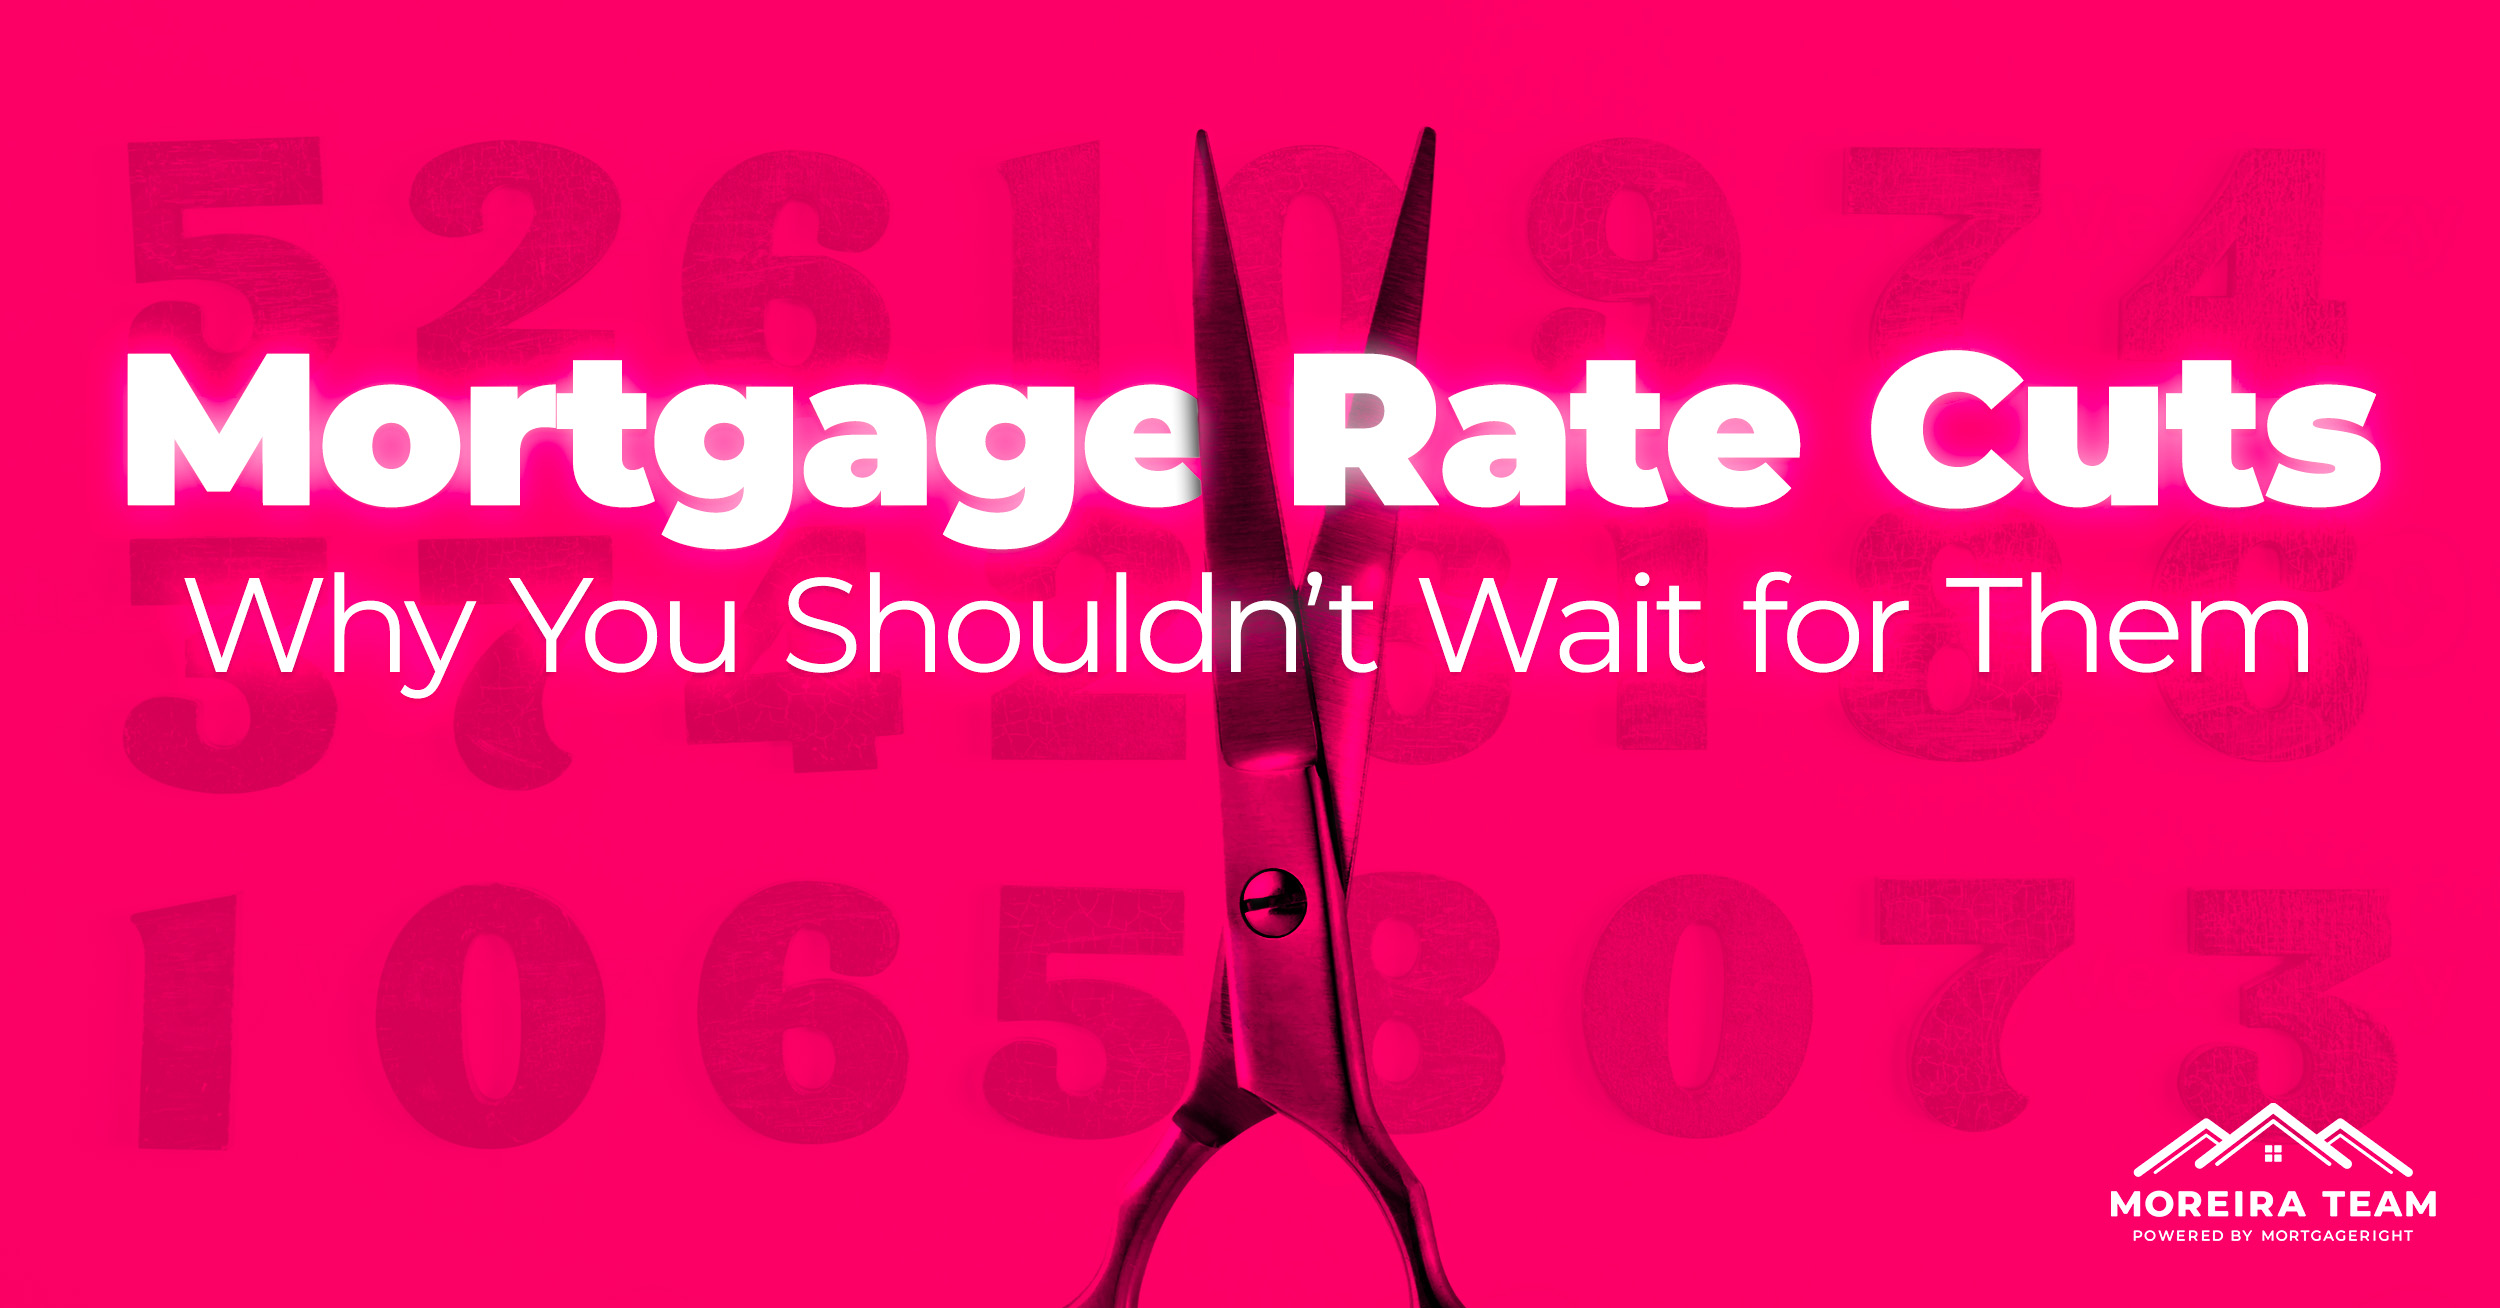 Mortgage Rate Cuts and Why You Shouldn’t Wait for Them